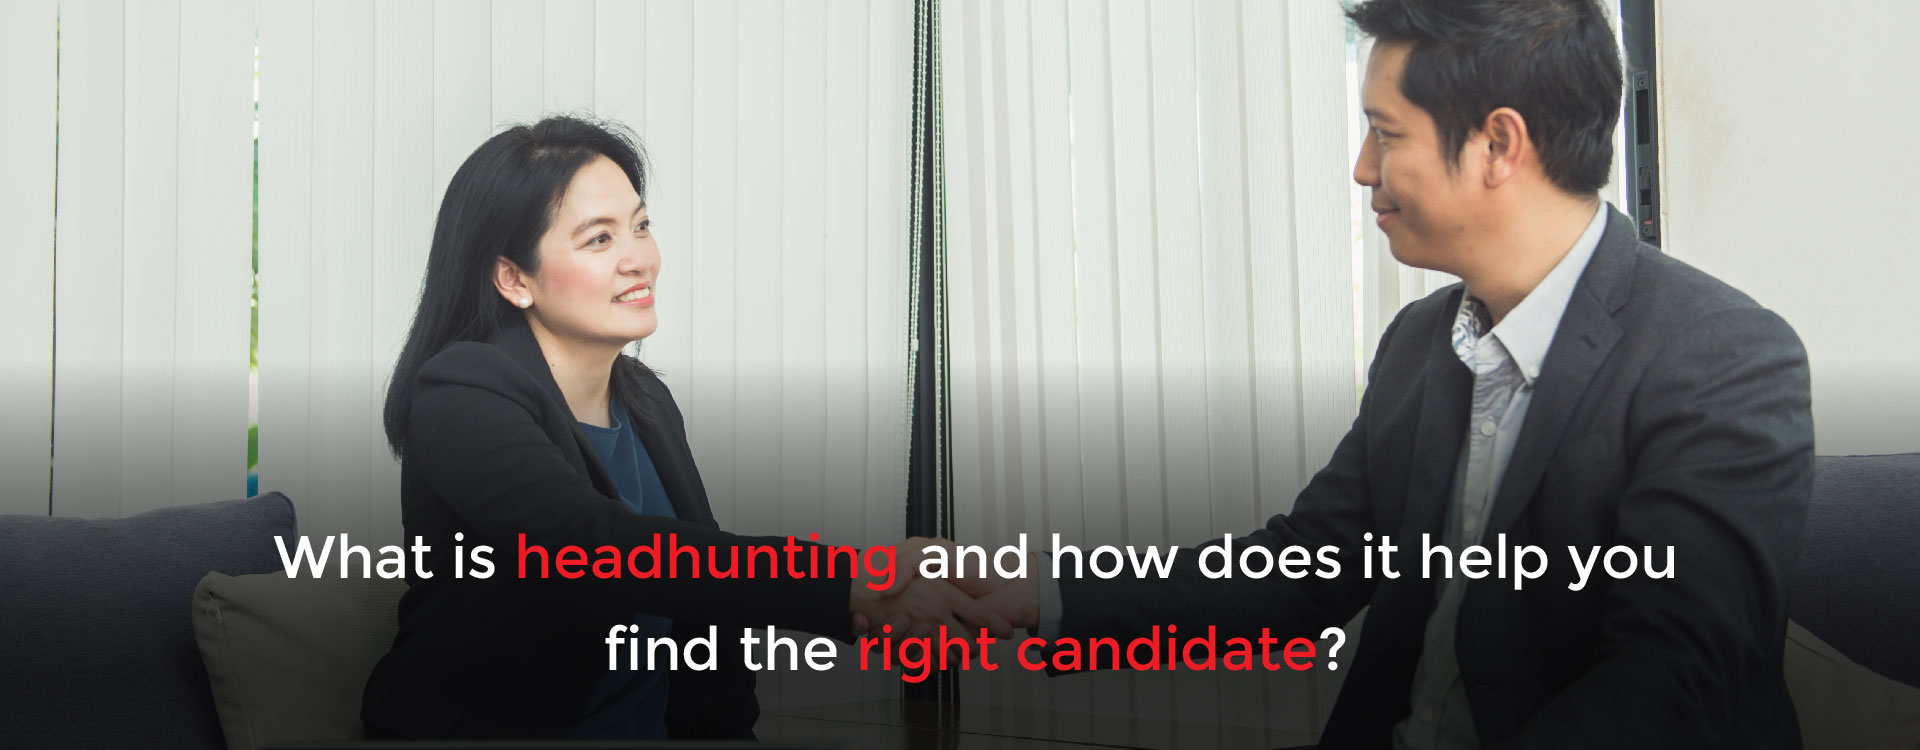 What is headhunting and how does it help you find the right candidate?